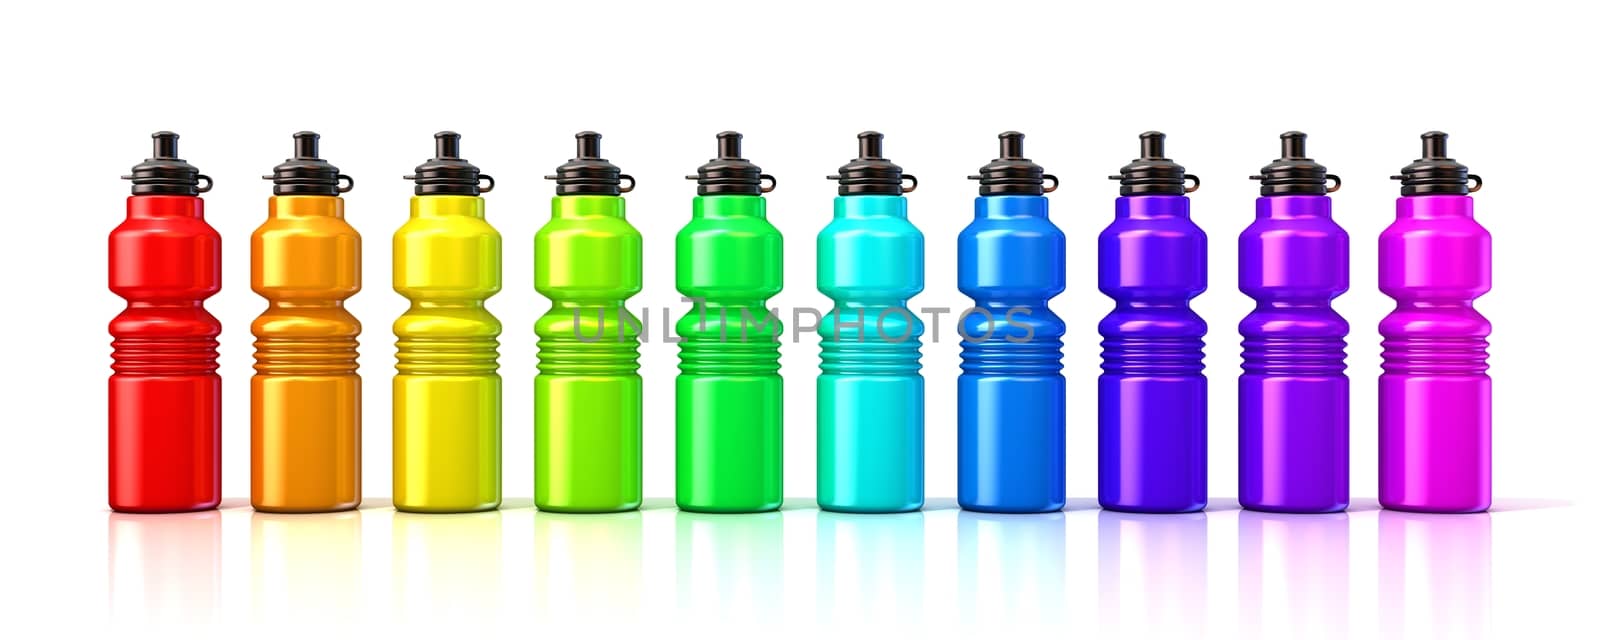 Colorful sport plastic water bottles. 3D by djmilic